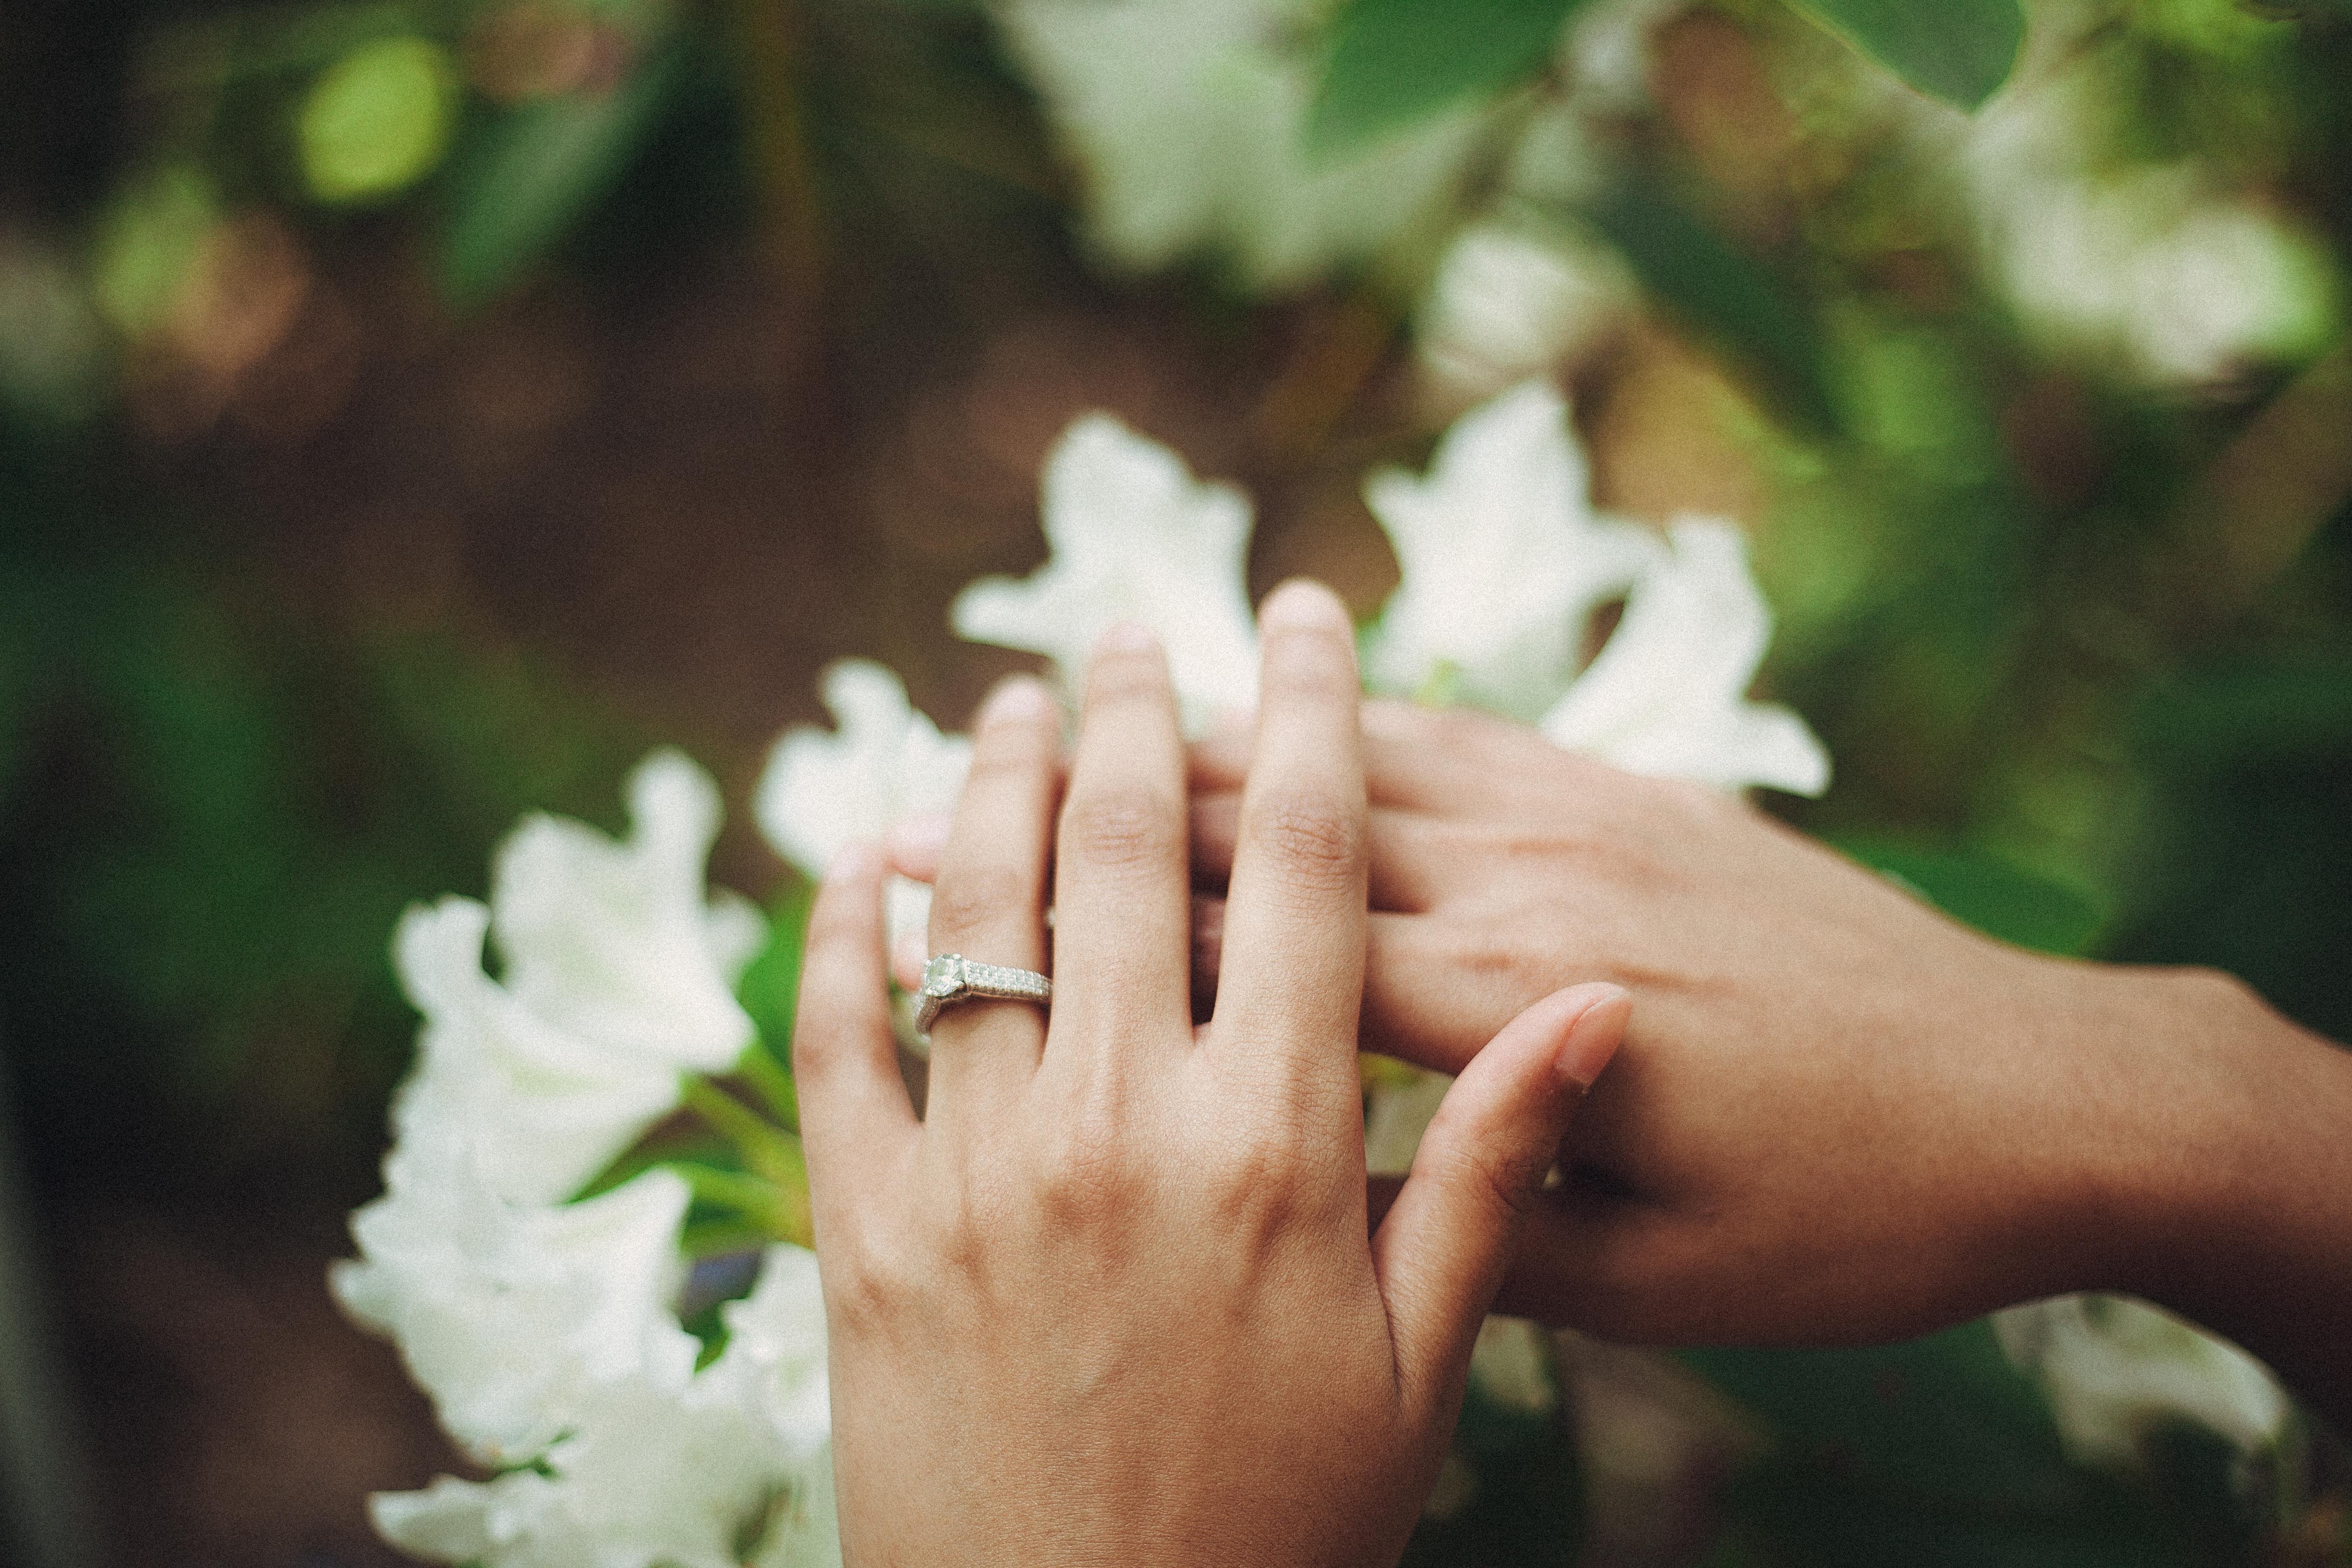 A woman's hand with an engagement ring | Photo: Pexels